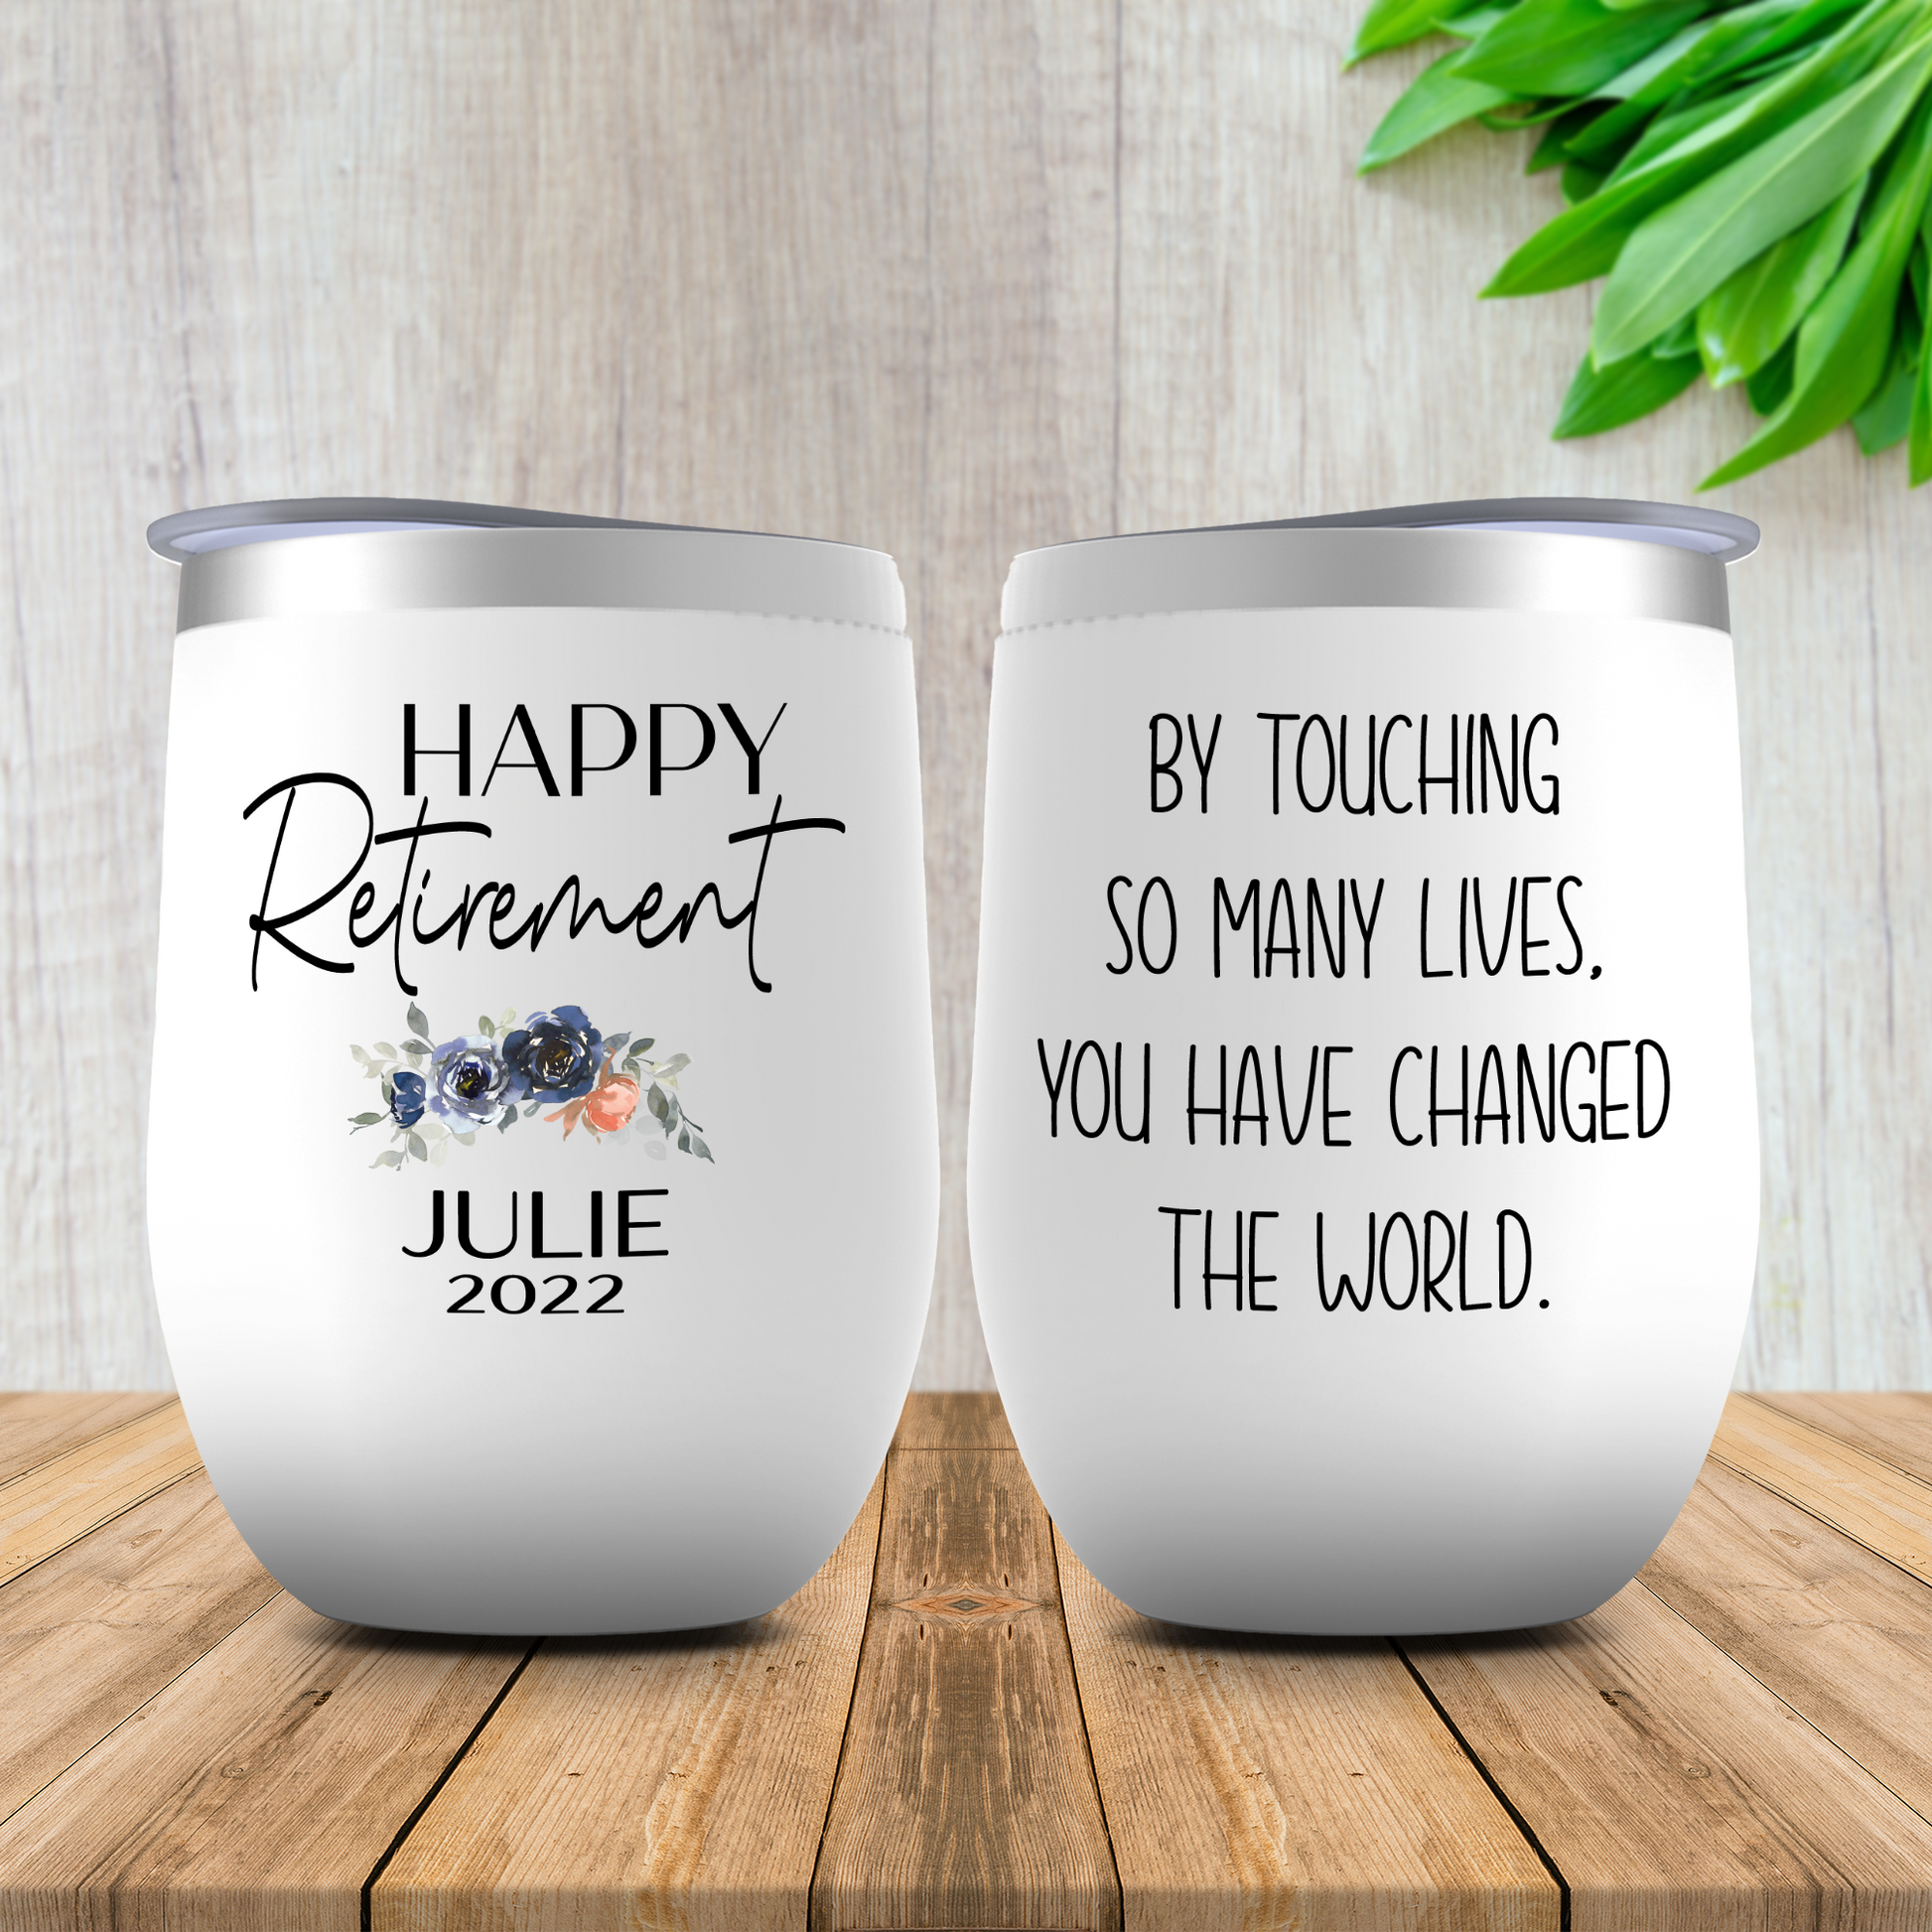 A Wise Woman Said Tumbler, Personalized Retirement Gift for Women, Funny  Retiree Mug for Her, Coworker, Boss or Friend Leaving Gift 